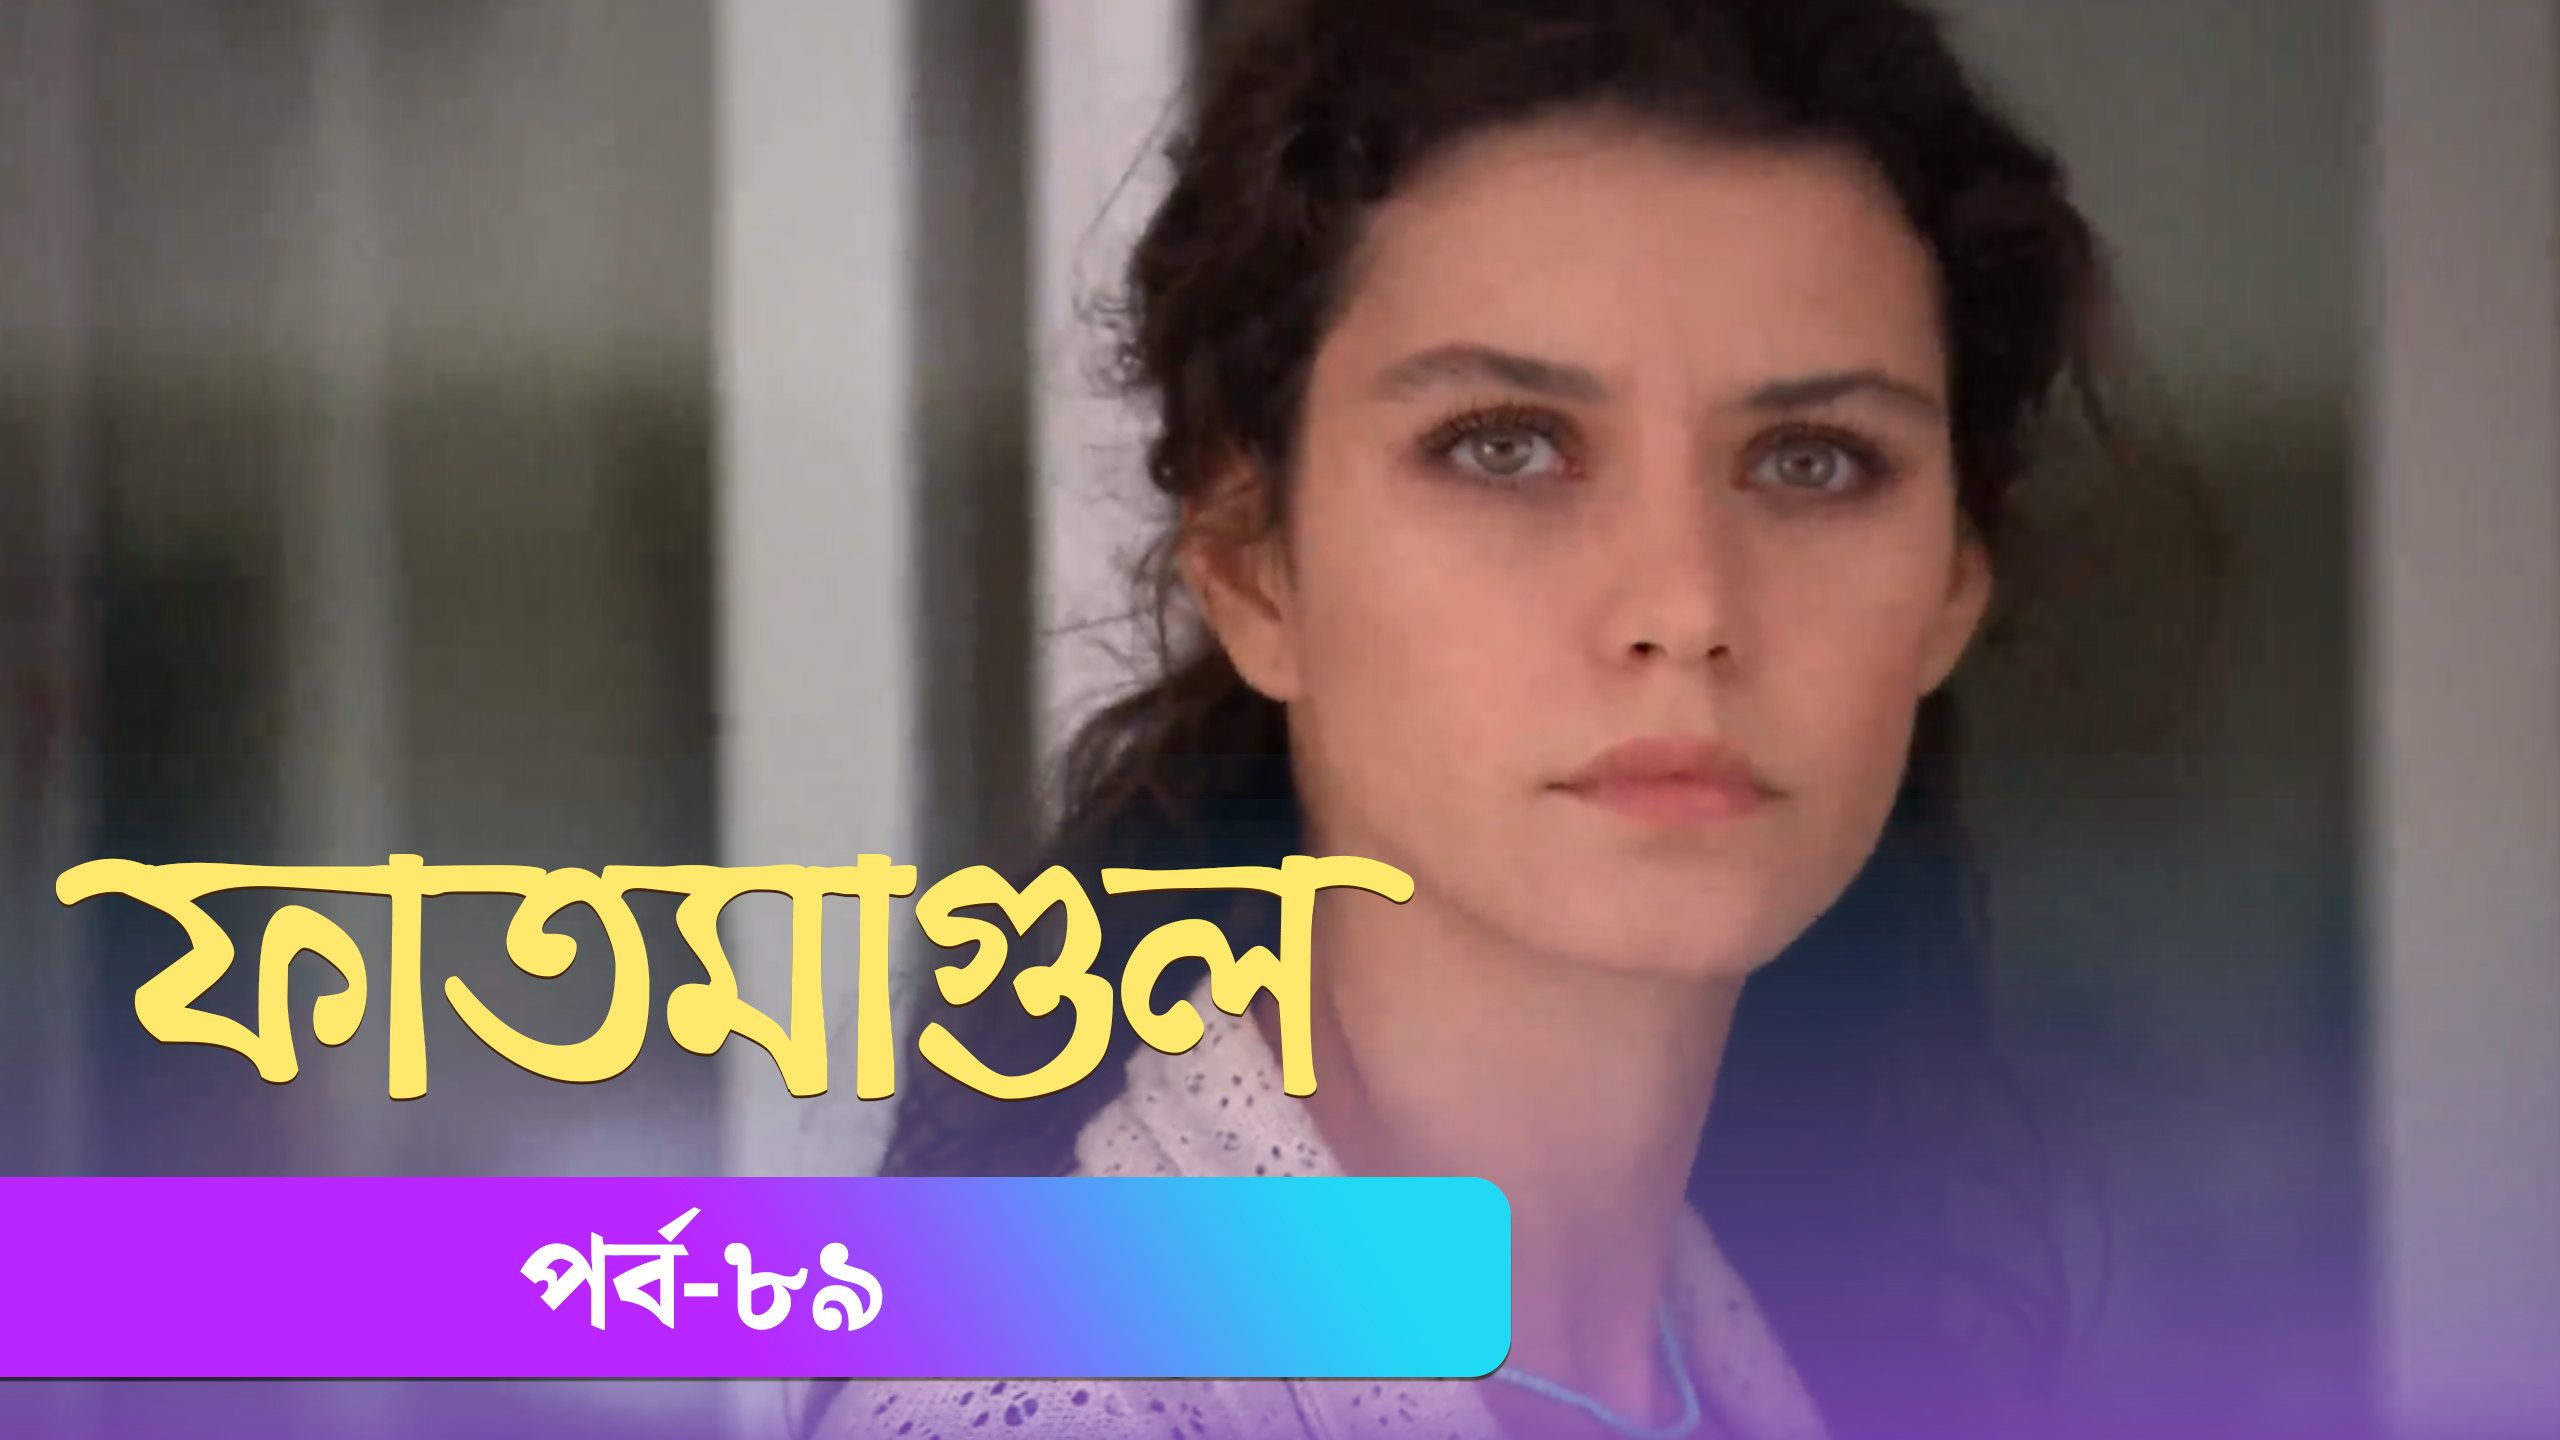 fatmagul cast real names